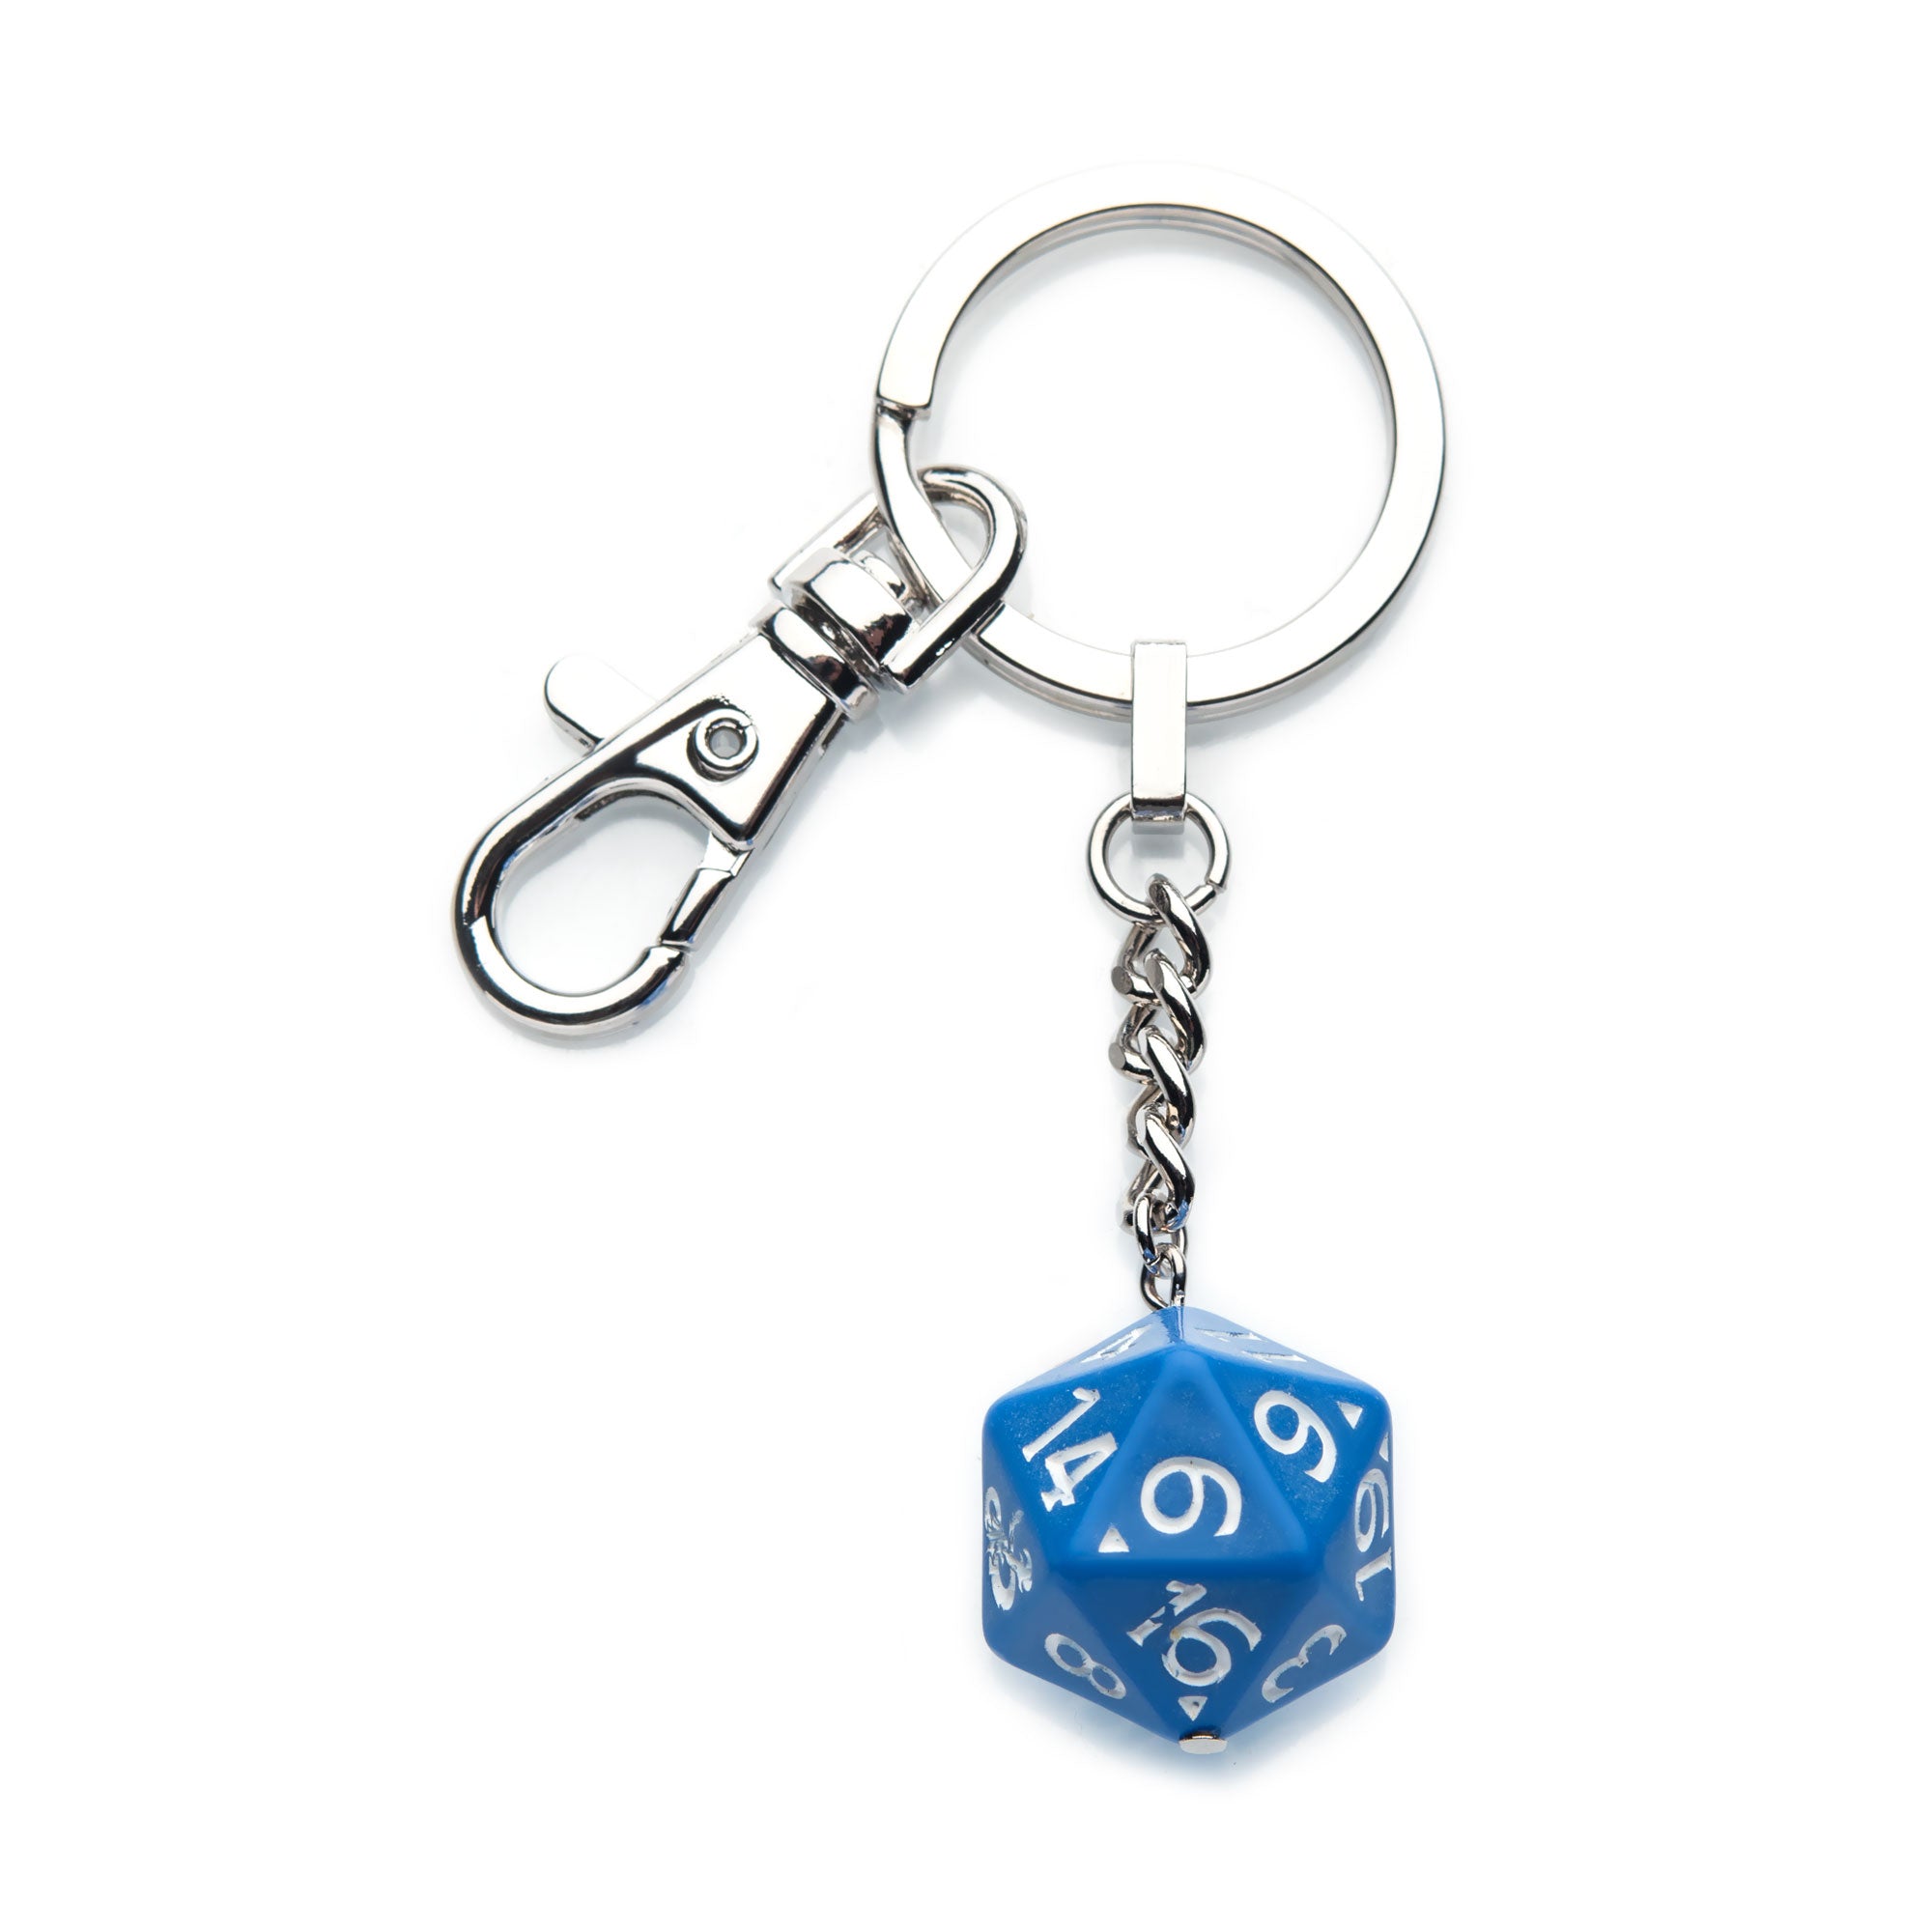 Hasbro Dungeons & Dragons D20 Dice Pendant Necklace